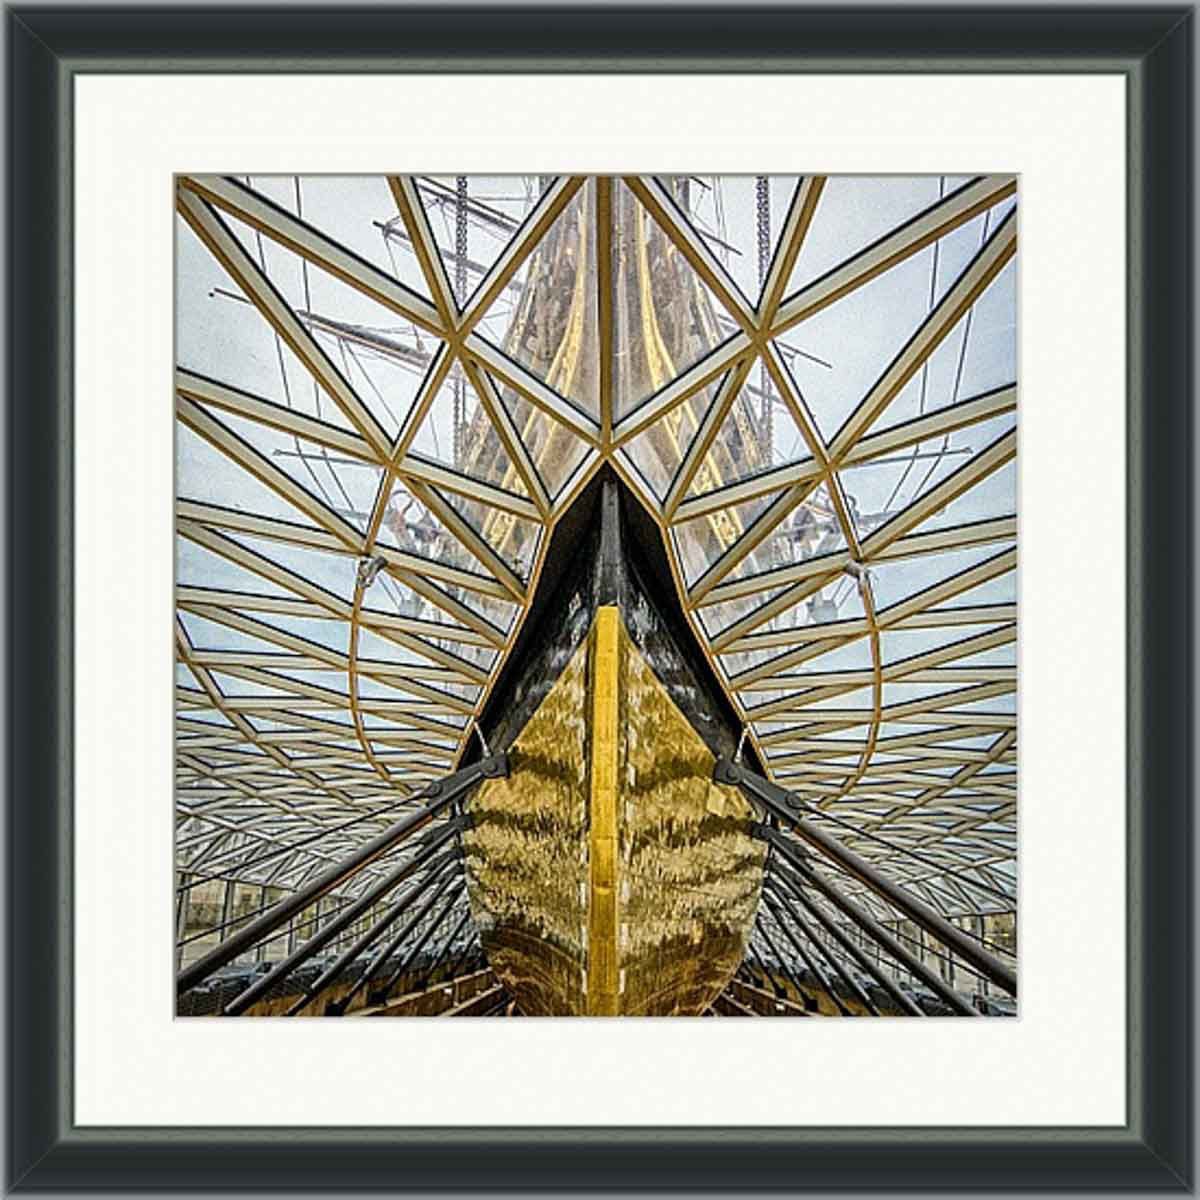 The Cutty Sark - 20x20 Limited Edition Framed Print by Ben Robson Hull